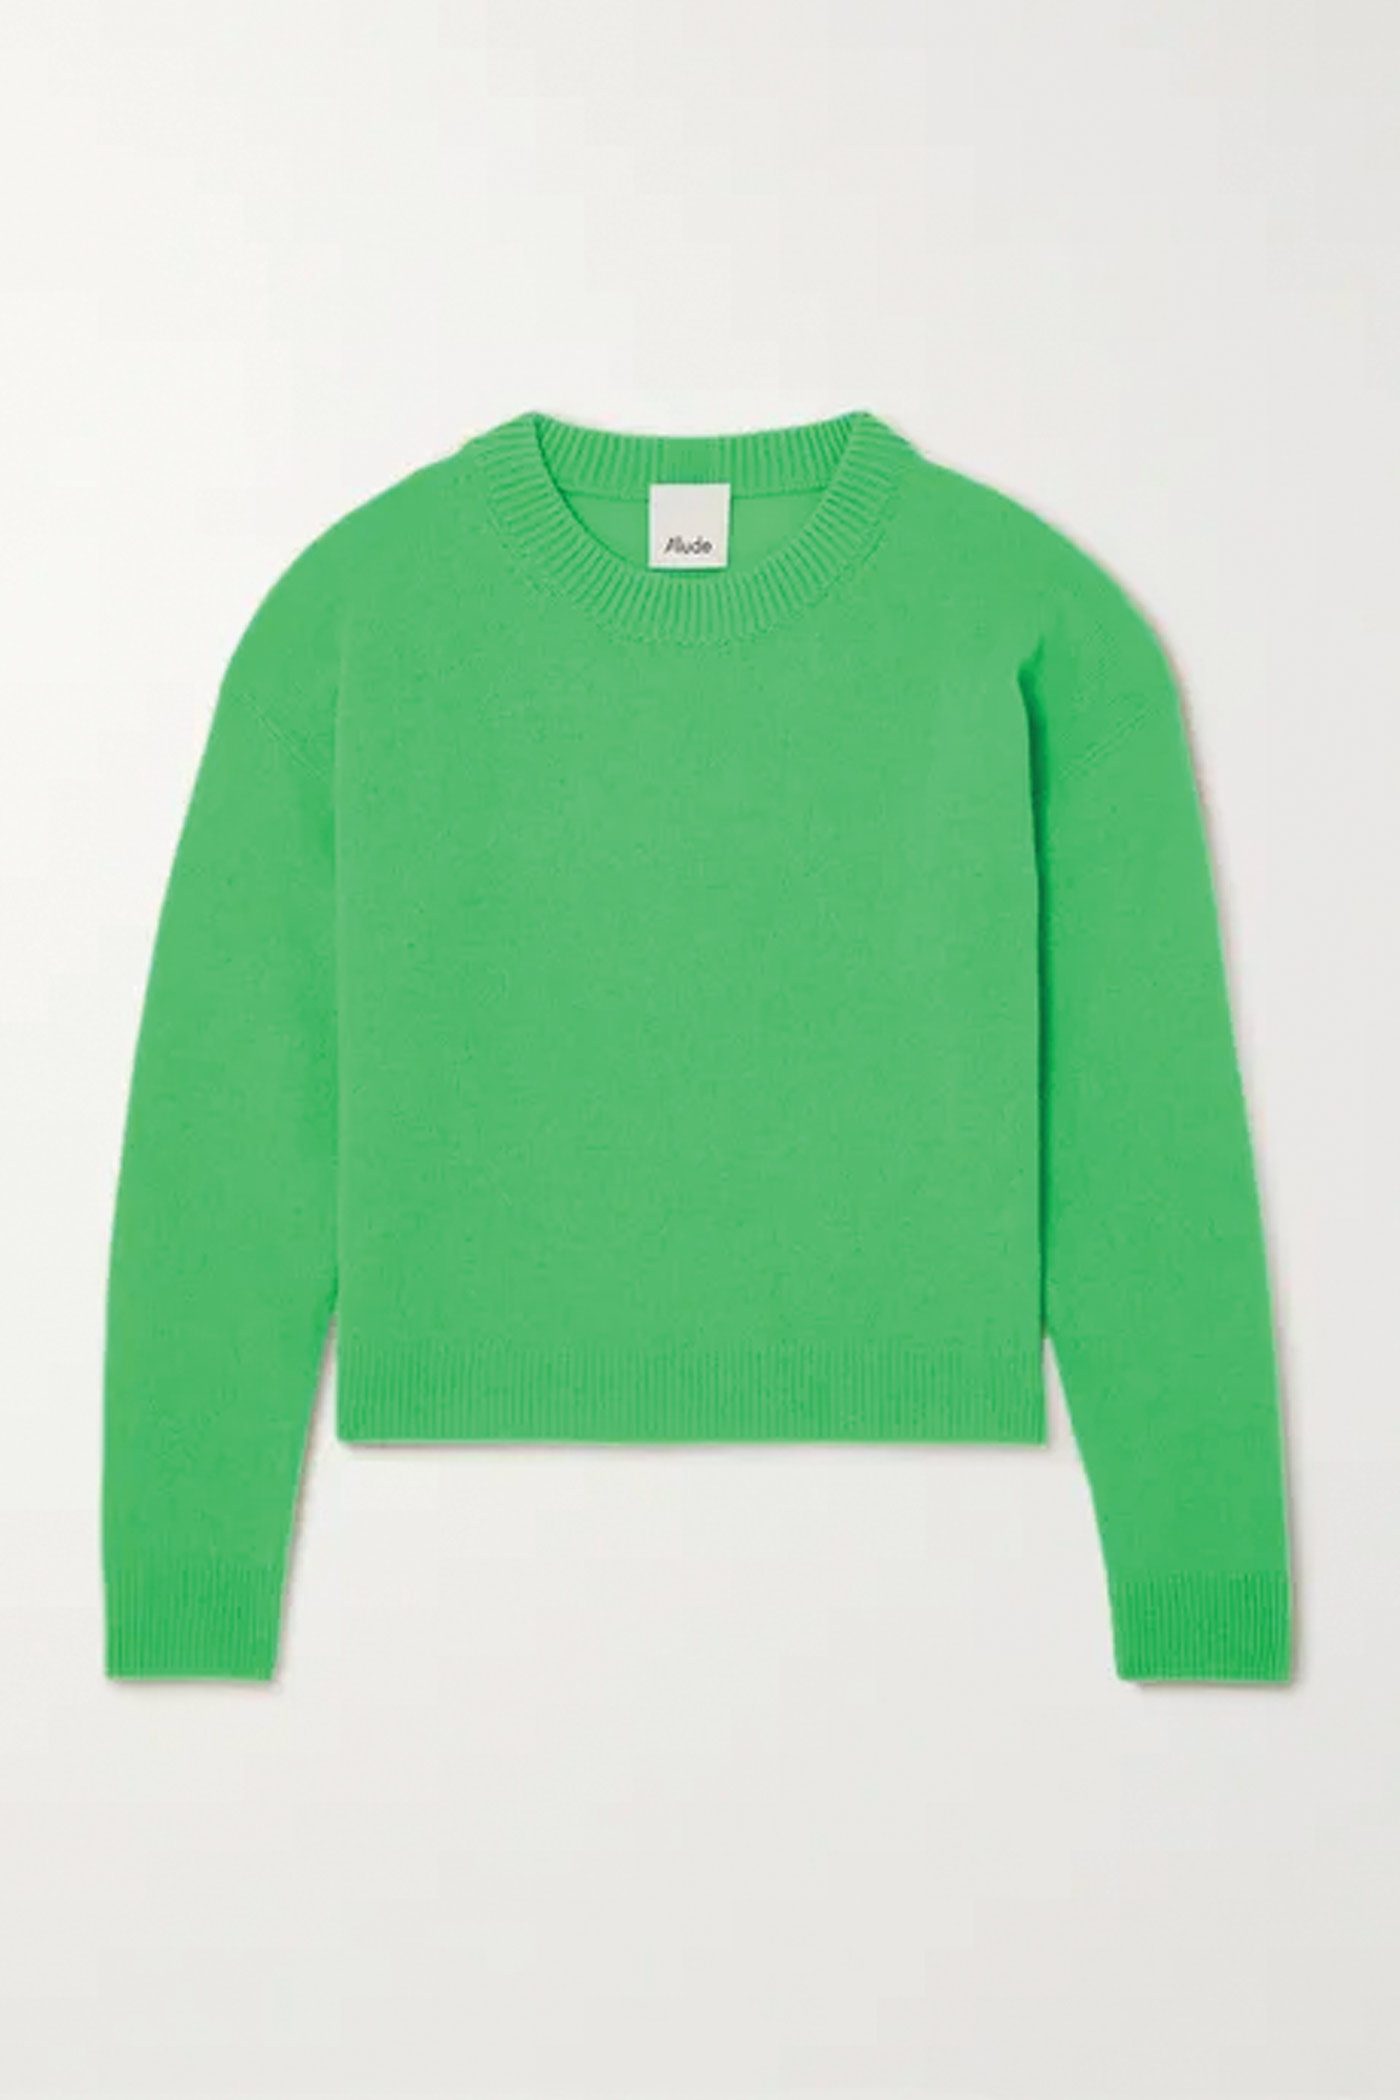 Wool And Cashmere Blend Sweater By Allude $245 Net A Porter.com